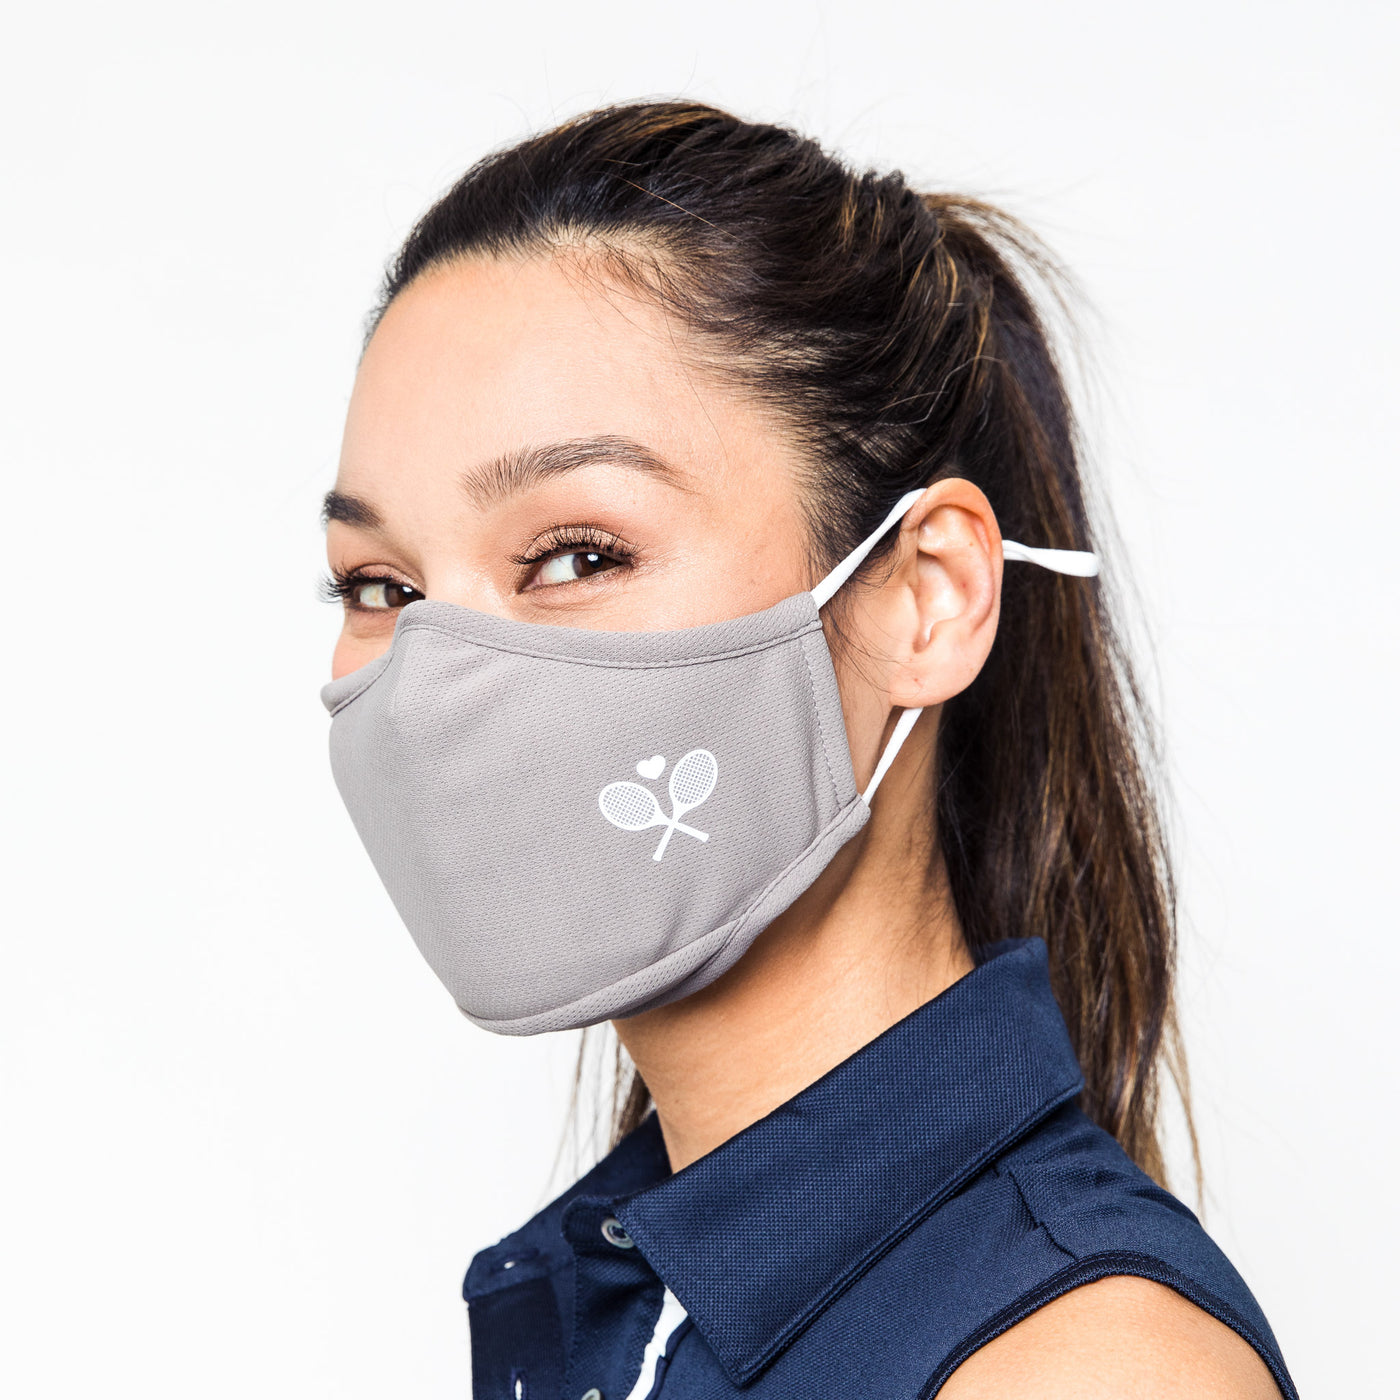 woman wears light grey face mask with white crossed racquets printed on one side